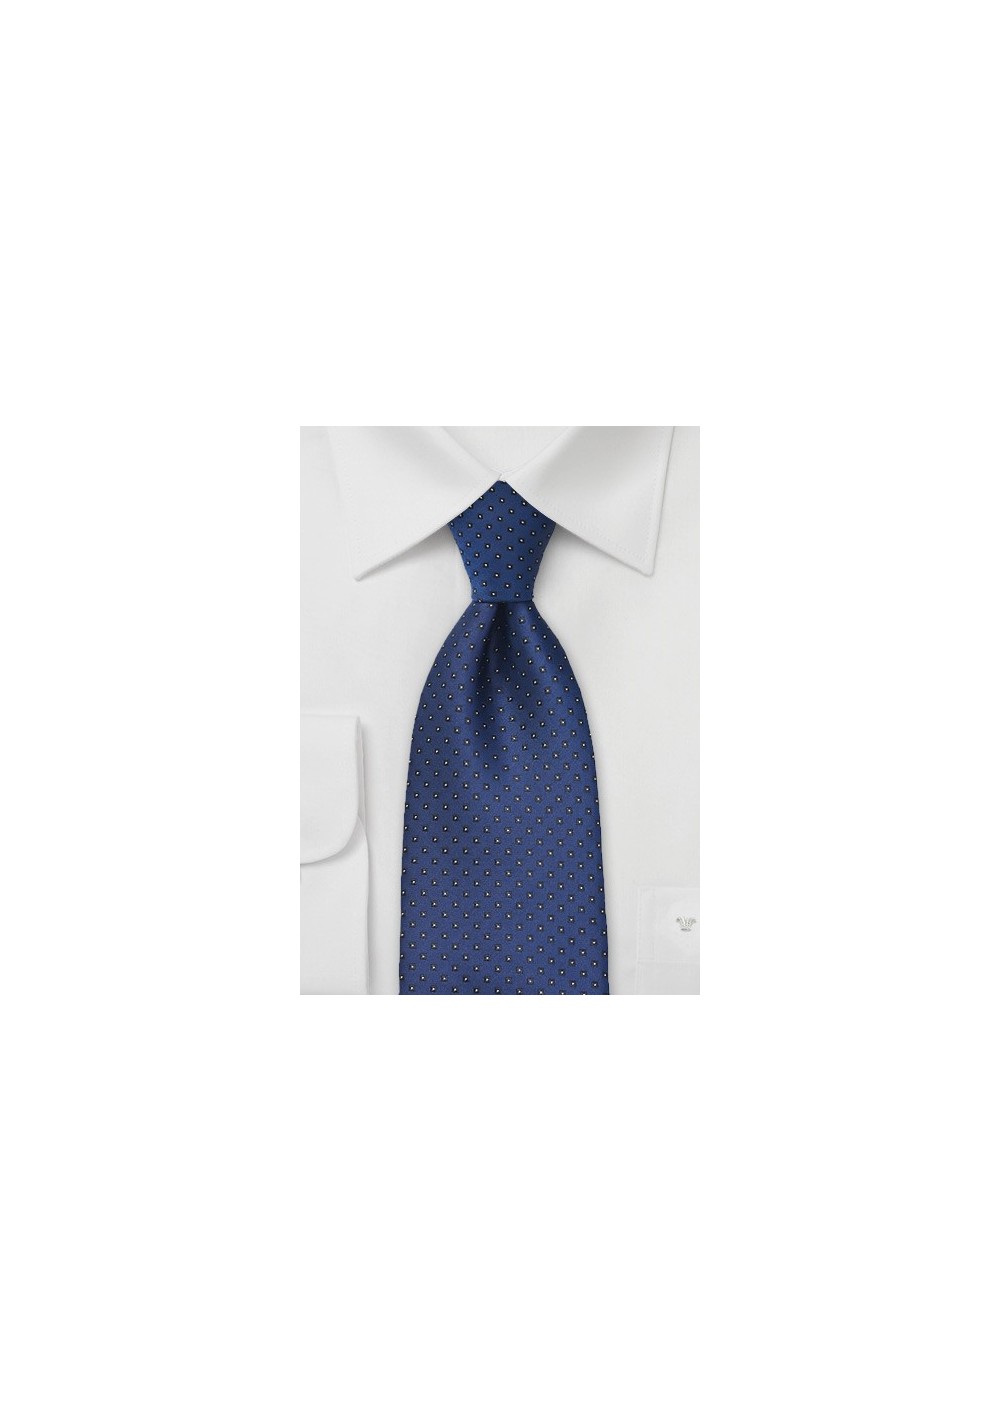 Pacific Blue Tie with Square Pattern